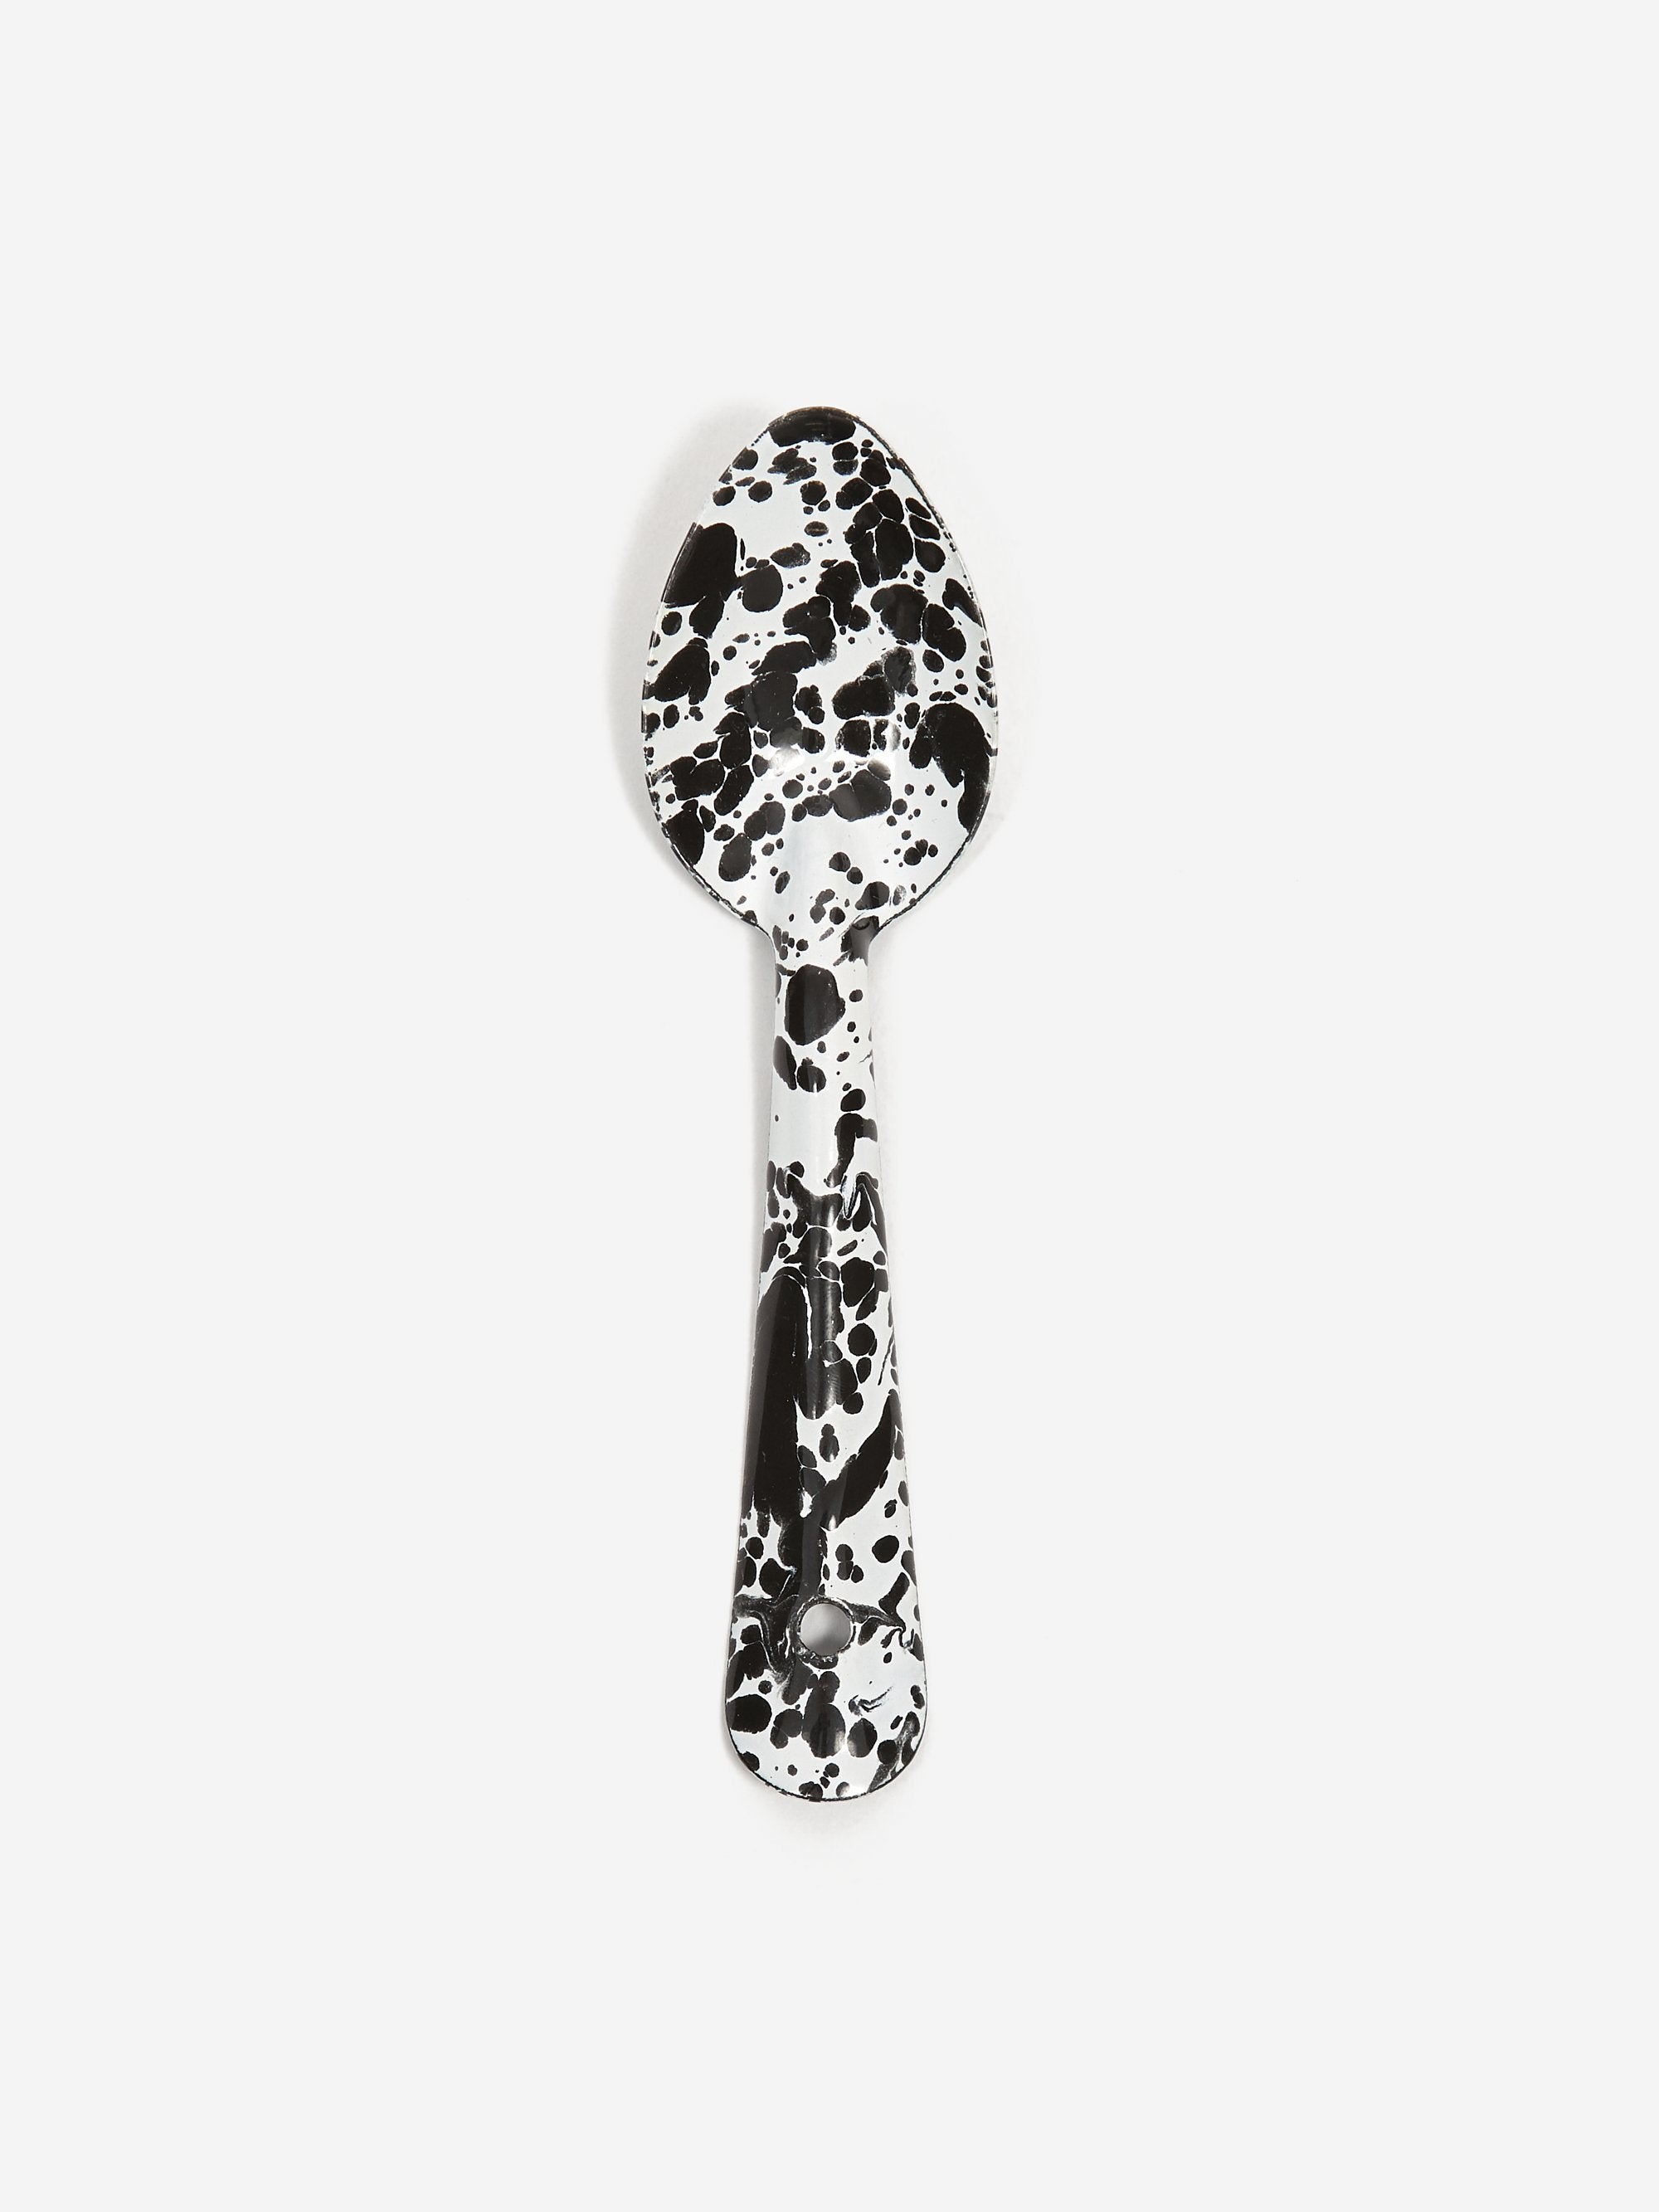 Enamel Speckled Tablespoon by PROSE Tabletop